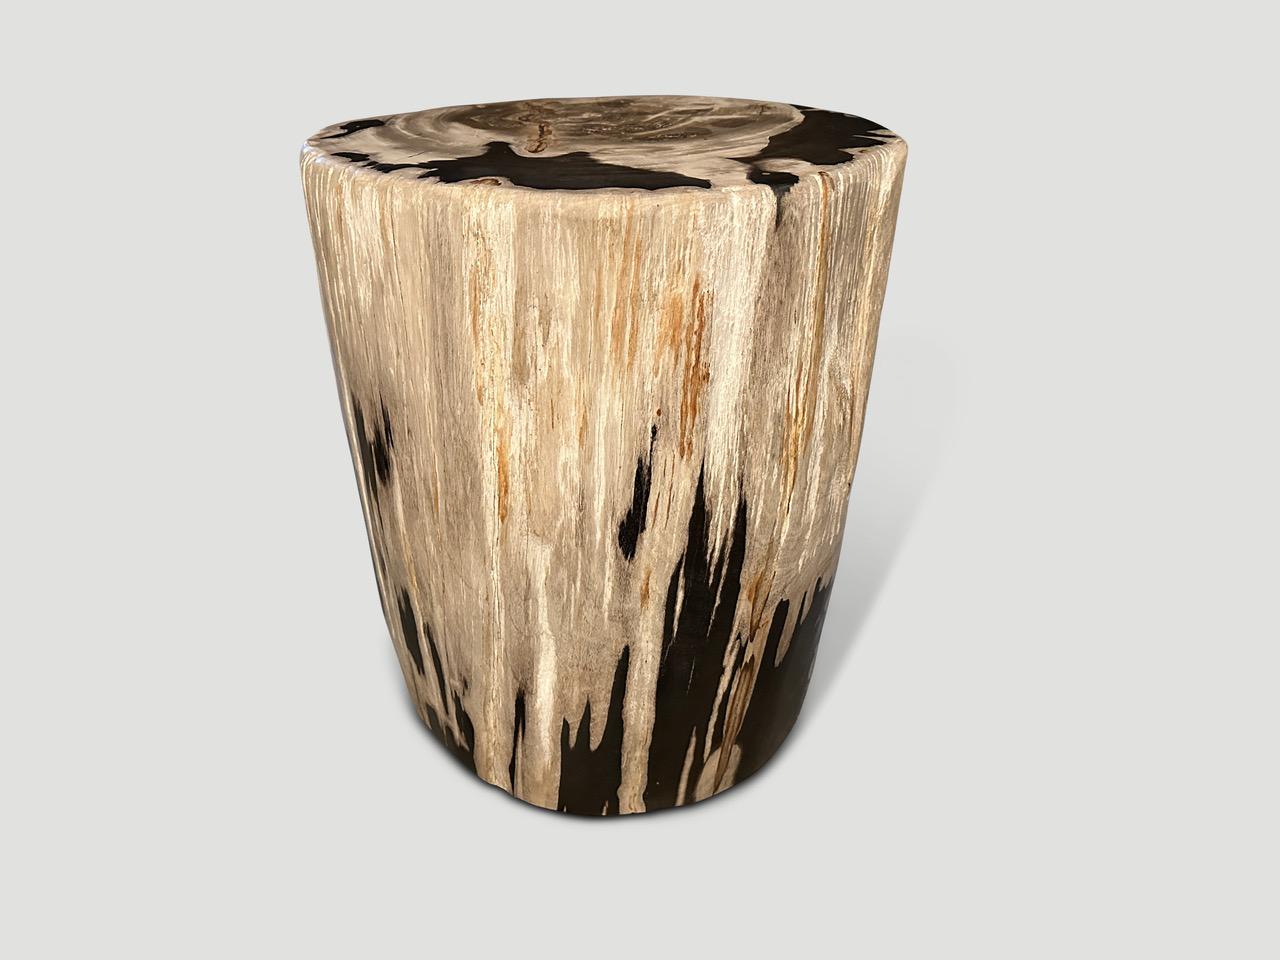 Impressive beautiful tones on this high quality super smooth, tall petrified wood side table or pedestal. It’s fascinating how Mother Nature produces these stunning 40 million year old petrified teak logs with such contrasting colors and natural